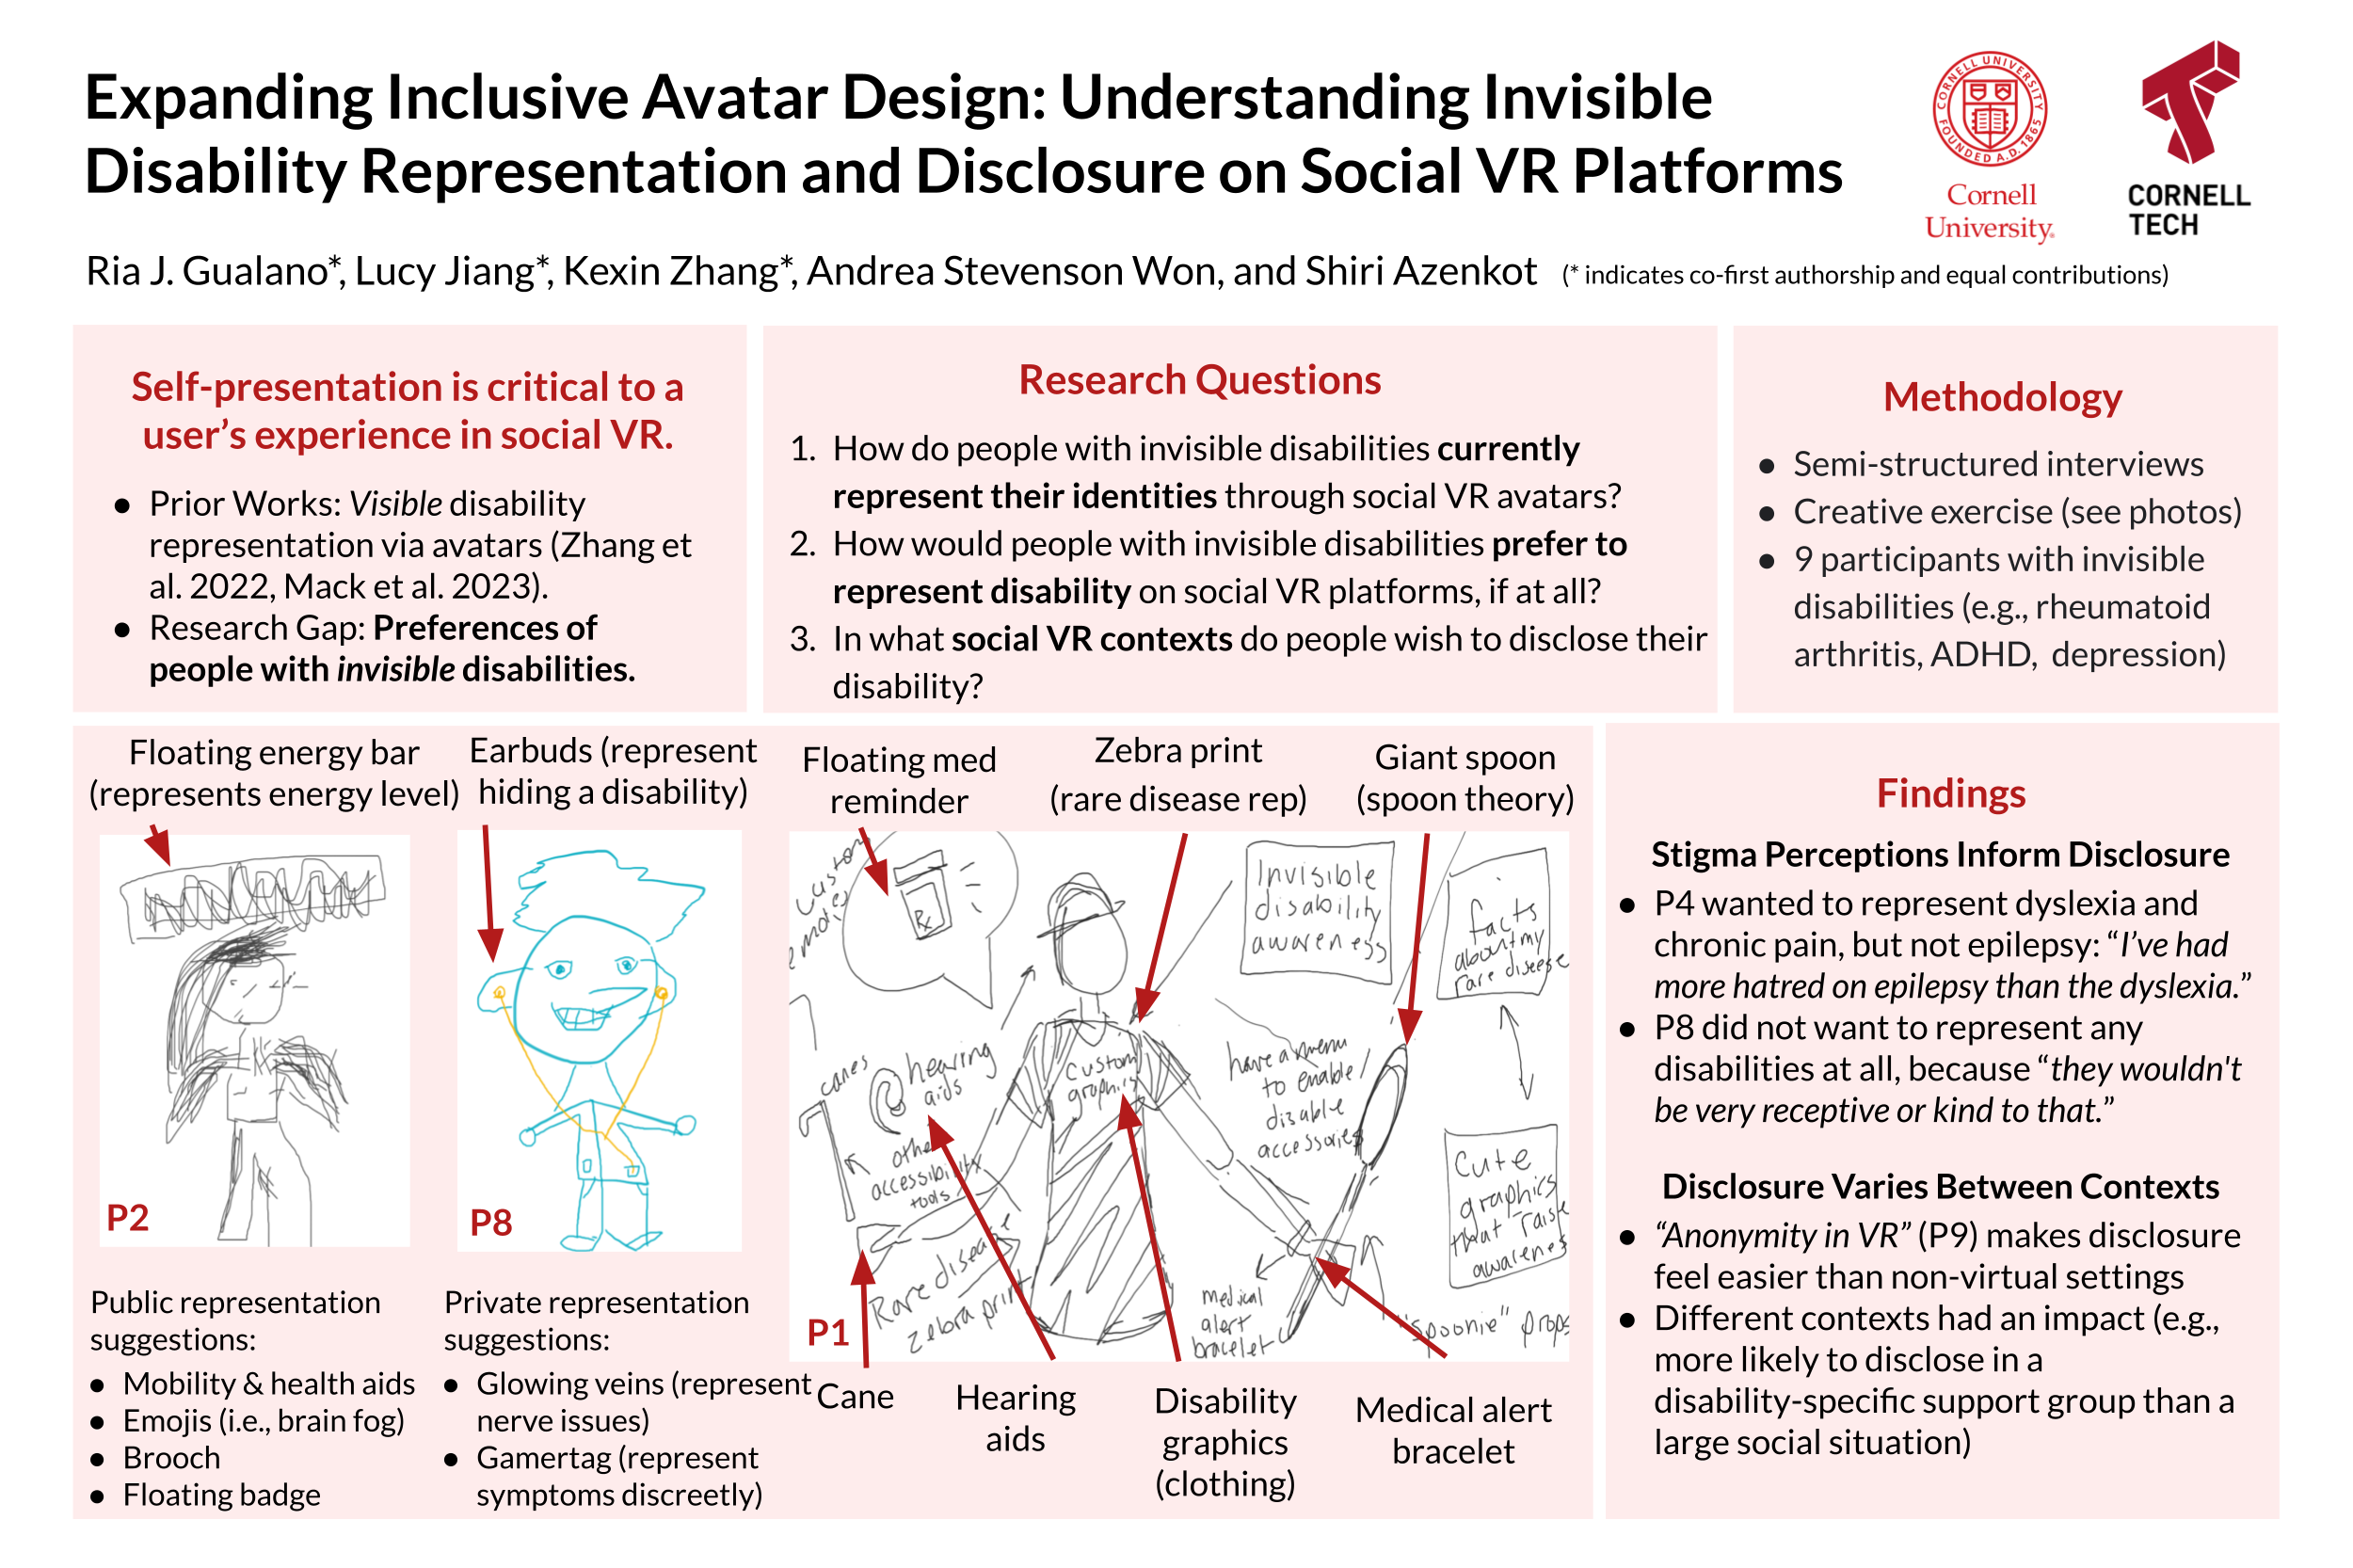 Expanding Inclusive Avatar Design: Understanding Invisible Disability Representation and Disclosure on Social VR Platforms. Ria J. Gualano*, Lucy Jiang*, Kexin Zhang*, Andrea Stevenson Won, and Shiri Azenkot. Self-presentation is critical to a user’s experience in social VR. Prior Works: Visible disability representation via avatars (Zhang et al. 2022, Mack et al. 2023). Research Gap: Preferences of people with invisible disabilities. Research Questions How do people with invisible disabilities currently represent their identities through social VR avatars? How would people with invisible disabilities prefer to represent disability on social VR platforms, if at all? In what social VR contexts do people wish to disclose their disability? Methodology Semi-structured interviews Creative exercise (see photos) 9 participants with invisible disabilities (e.g., rheumatoid arthritis, ADHD, depression) Public representation suggestions: Mobility & health aids Emojis (i.e., brain fog) Brooch Floating badge Drawing of person with a bar above their head. Floating energy bar (represents energy level) Private representation suggestions: Glowing veins (represent nerve issues) Gamertag (represent symptoms discreetly) Drawing of person with earbuds. Earbus represent hiding a disability. Drawing of person with multiple representive elements. Floating med reminder, zebra print representing rare diseases, giant spoon representing spoon theory, cane, hearing aids, disability graphics clothing, medical alert bracelet. Findings Stigma Perceptions Inform Disclosure P4 wanted to represent dyslexia and chronic pain, but not epilepsy: “I’ve had more hatred on epilepsy than the dyslexia.” P8 did not want to represent any disabilities at all, because “they wouldn't be very receptive or kind to that.” Disclosure Varies Between Contexts “Anonymity in VR” (P9) makes disclosure feel easier than non-virtual settings Different contexts had an impact (e.g., more likely to disclose in a disability-specific support group than a large social situation)